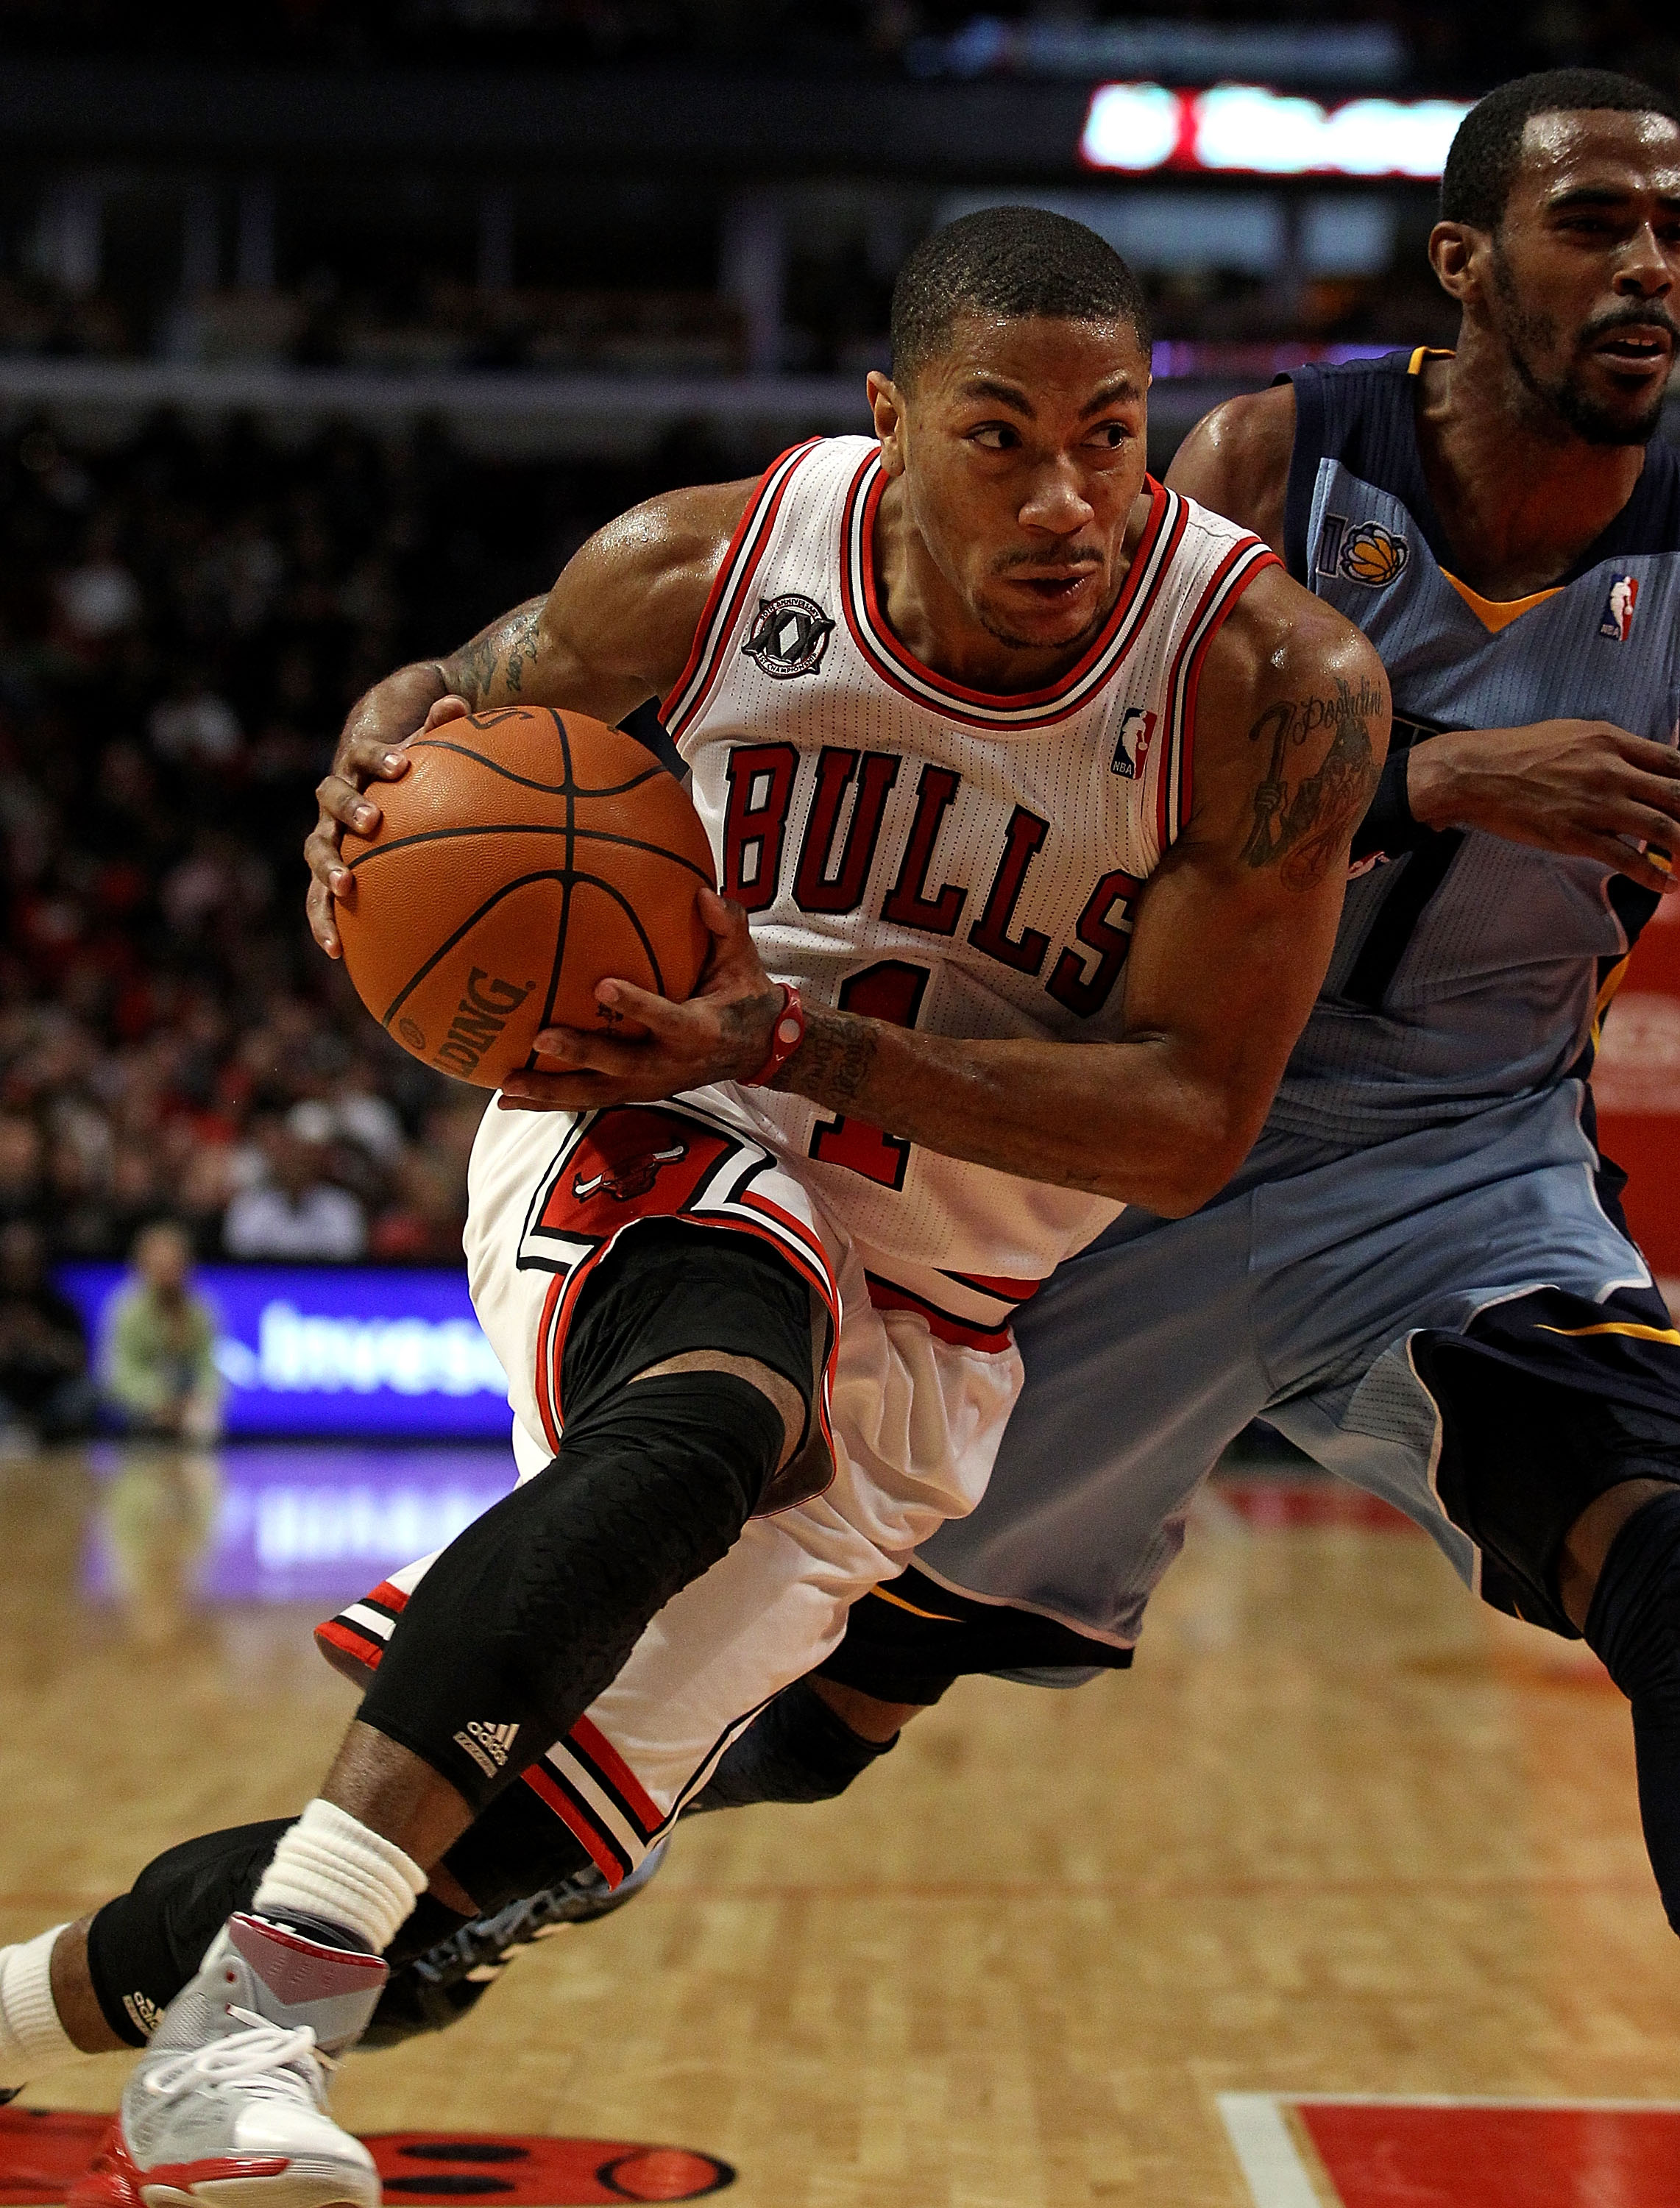 CHICAGO, IL - MARCH 25: Derrick Rose #1 of the Chicago Bulls drives against Mike Conley #11 of the Memphis Grizzlies at the United Center on March 25, 2011 in Chicago, Illinois. The Bulls defeated the Grizzlies 99-96. NOTE TO USER: User expressly acknowle